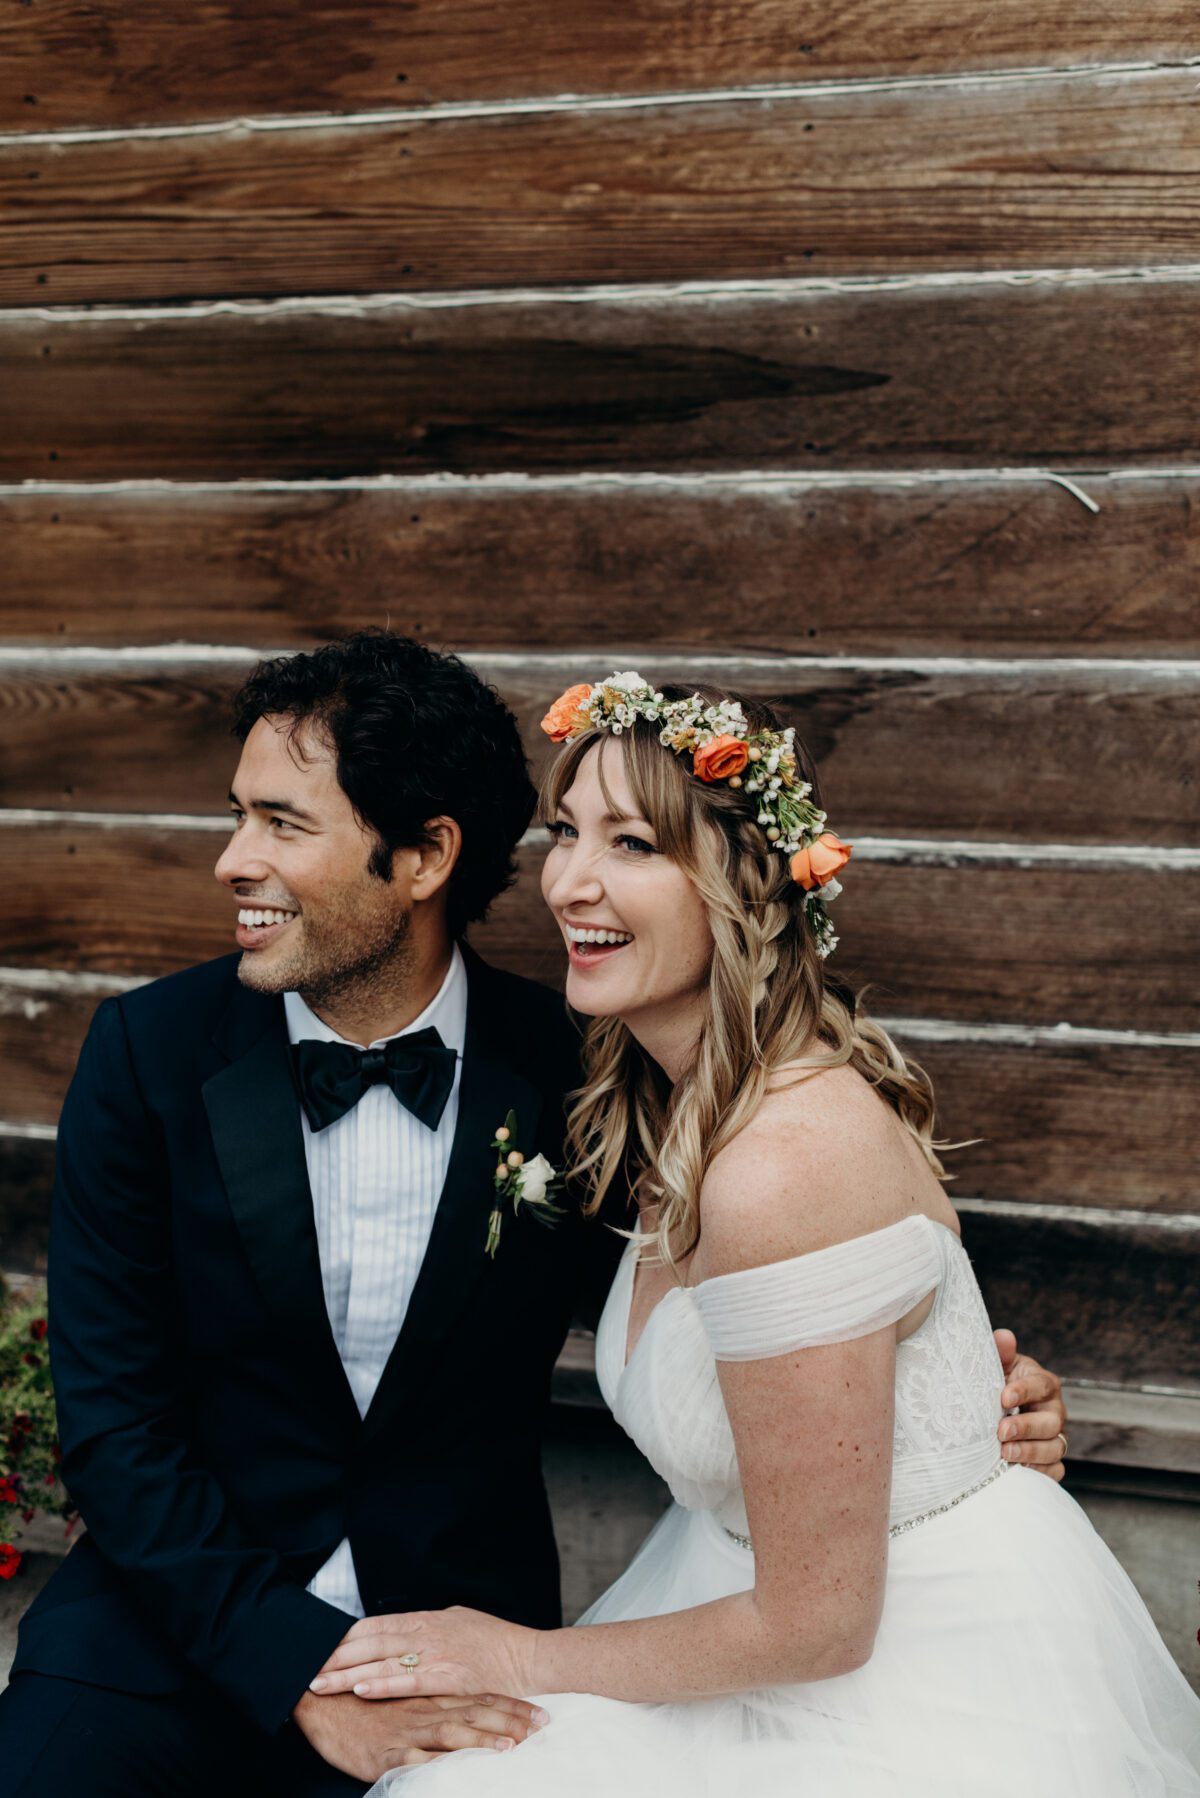 cute candid portrait of a newlywed couple smiling on their wedding day